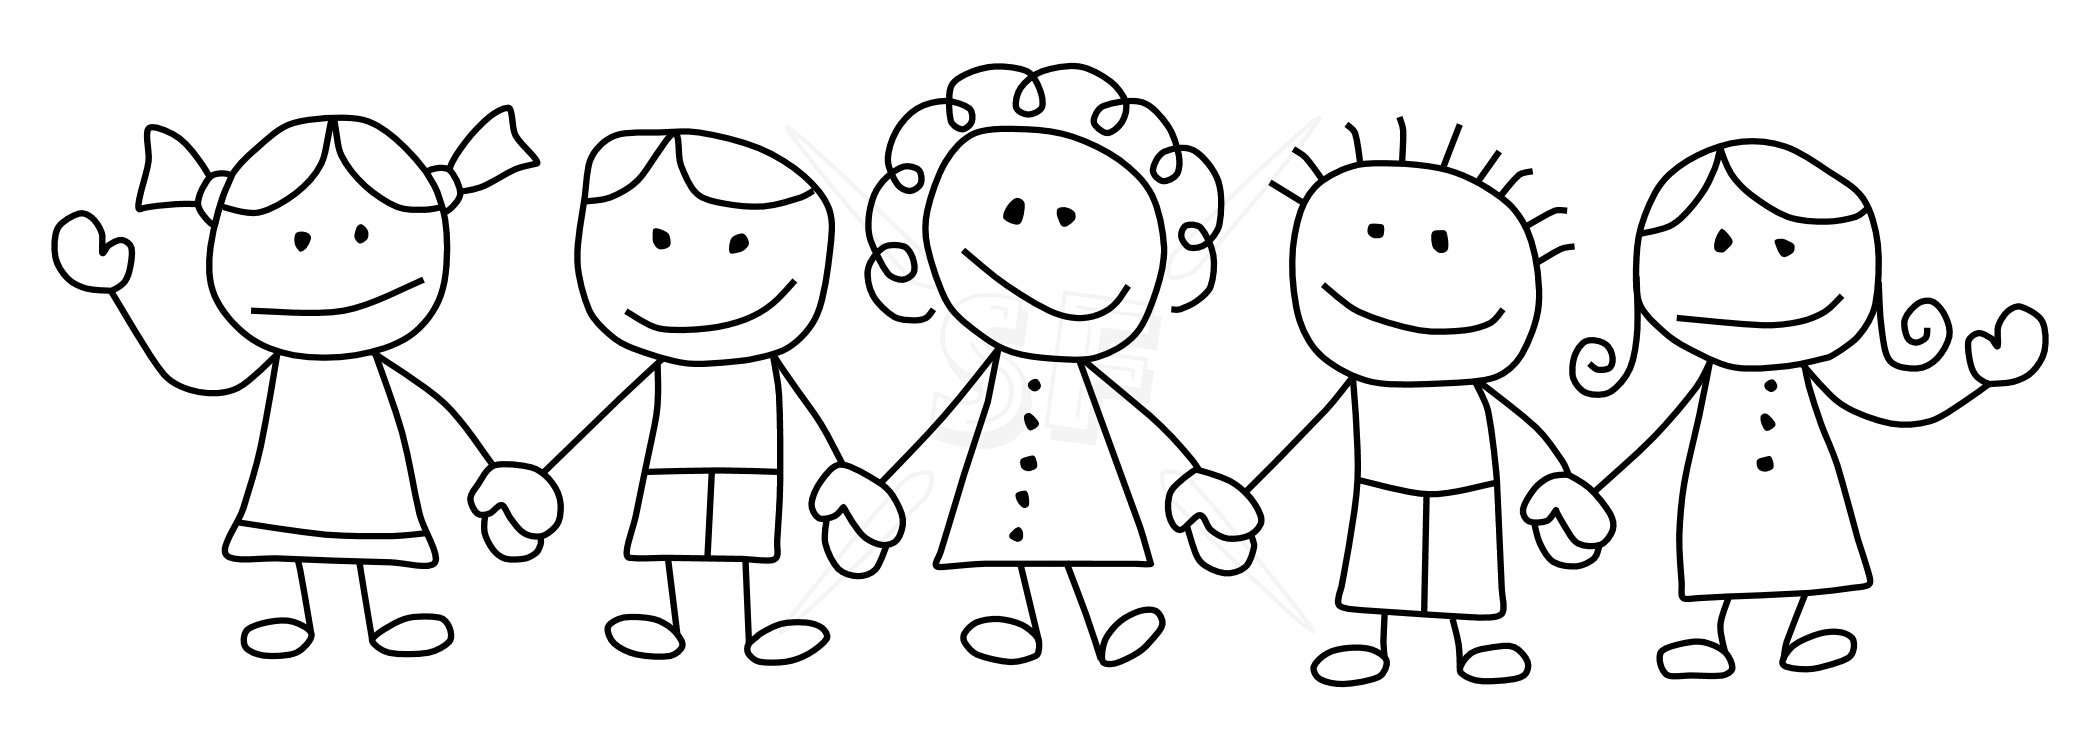 Stick people holding hands clipart clipart kid 2